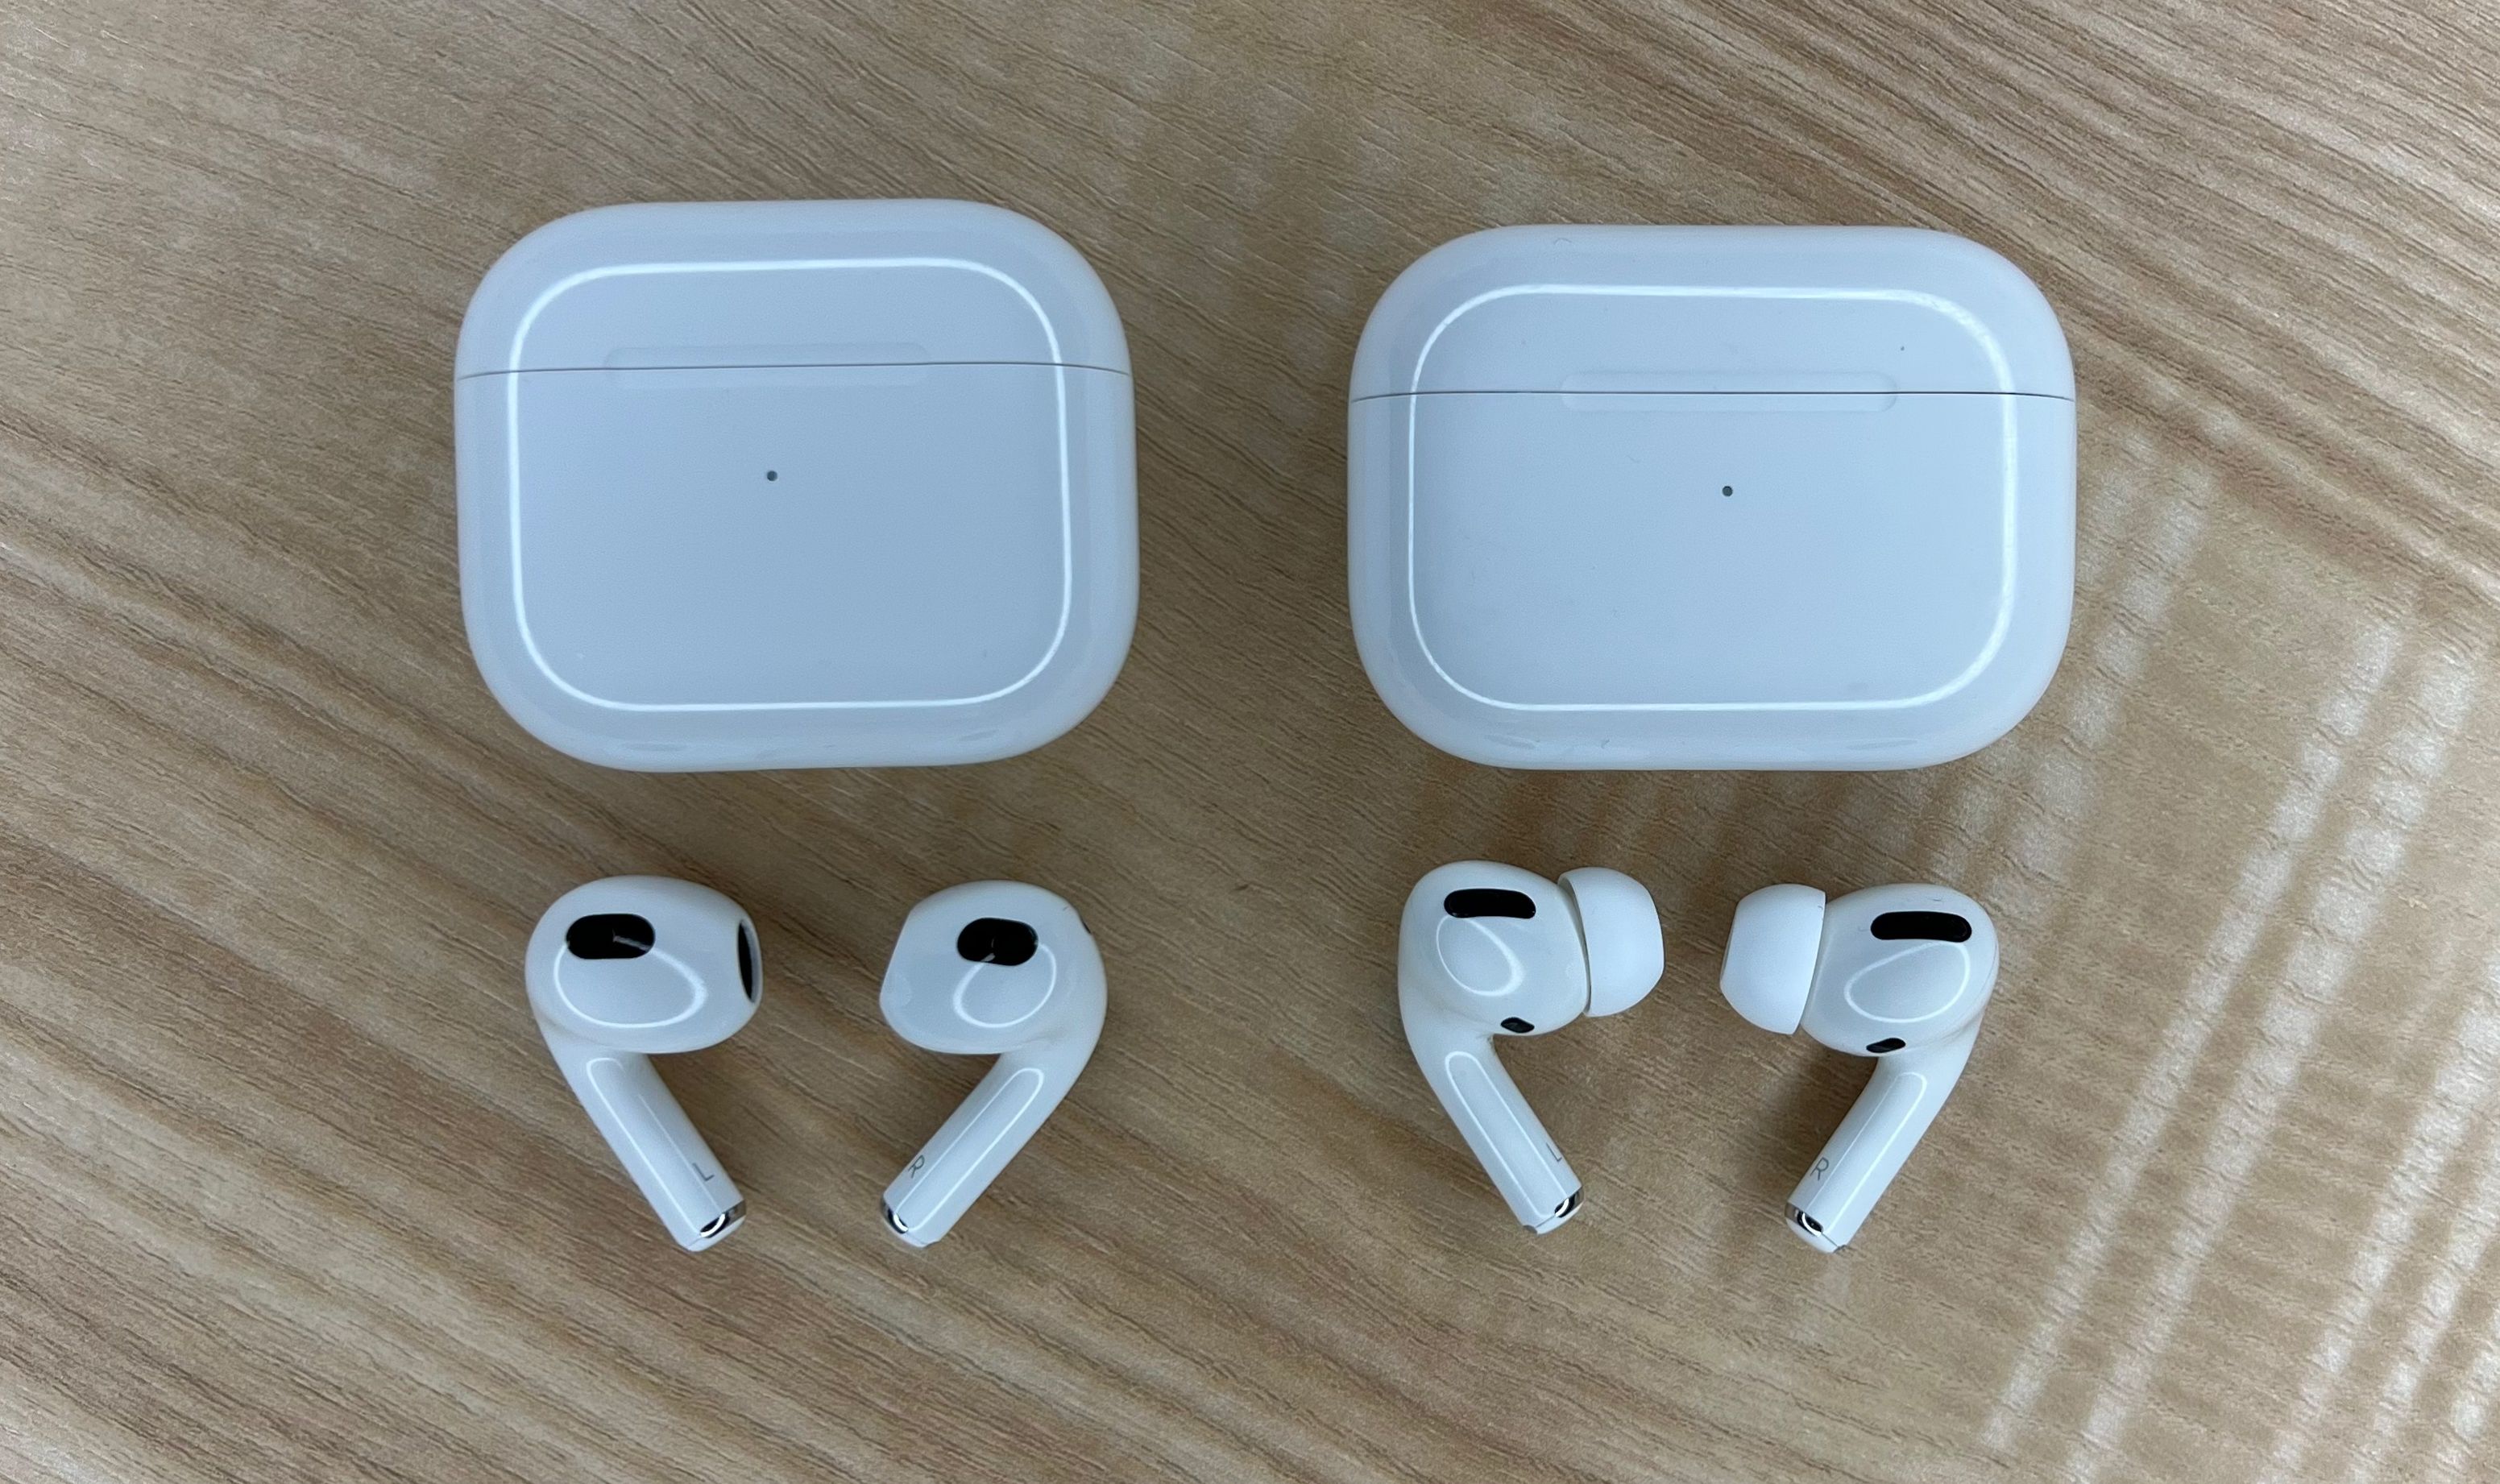 Pro AirPods 3: the difference? | CNN Underscored